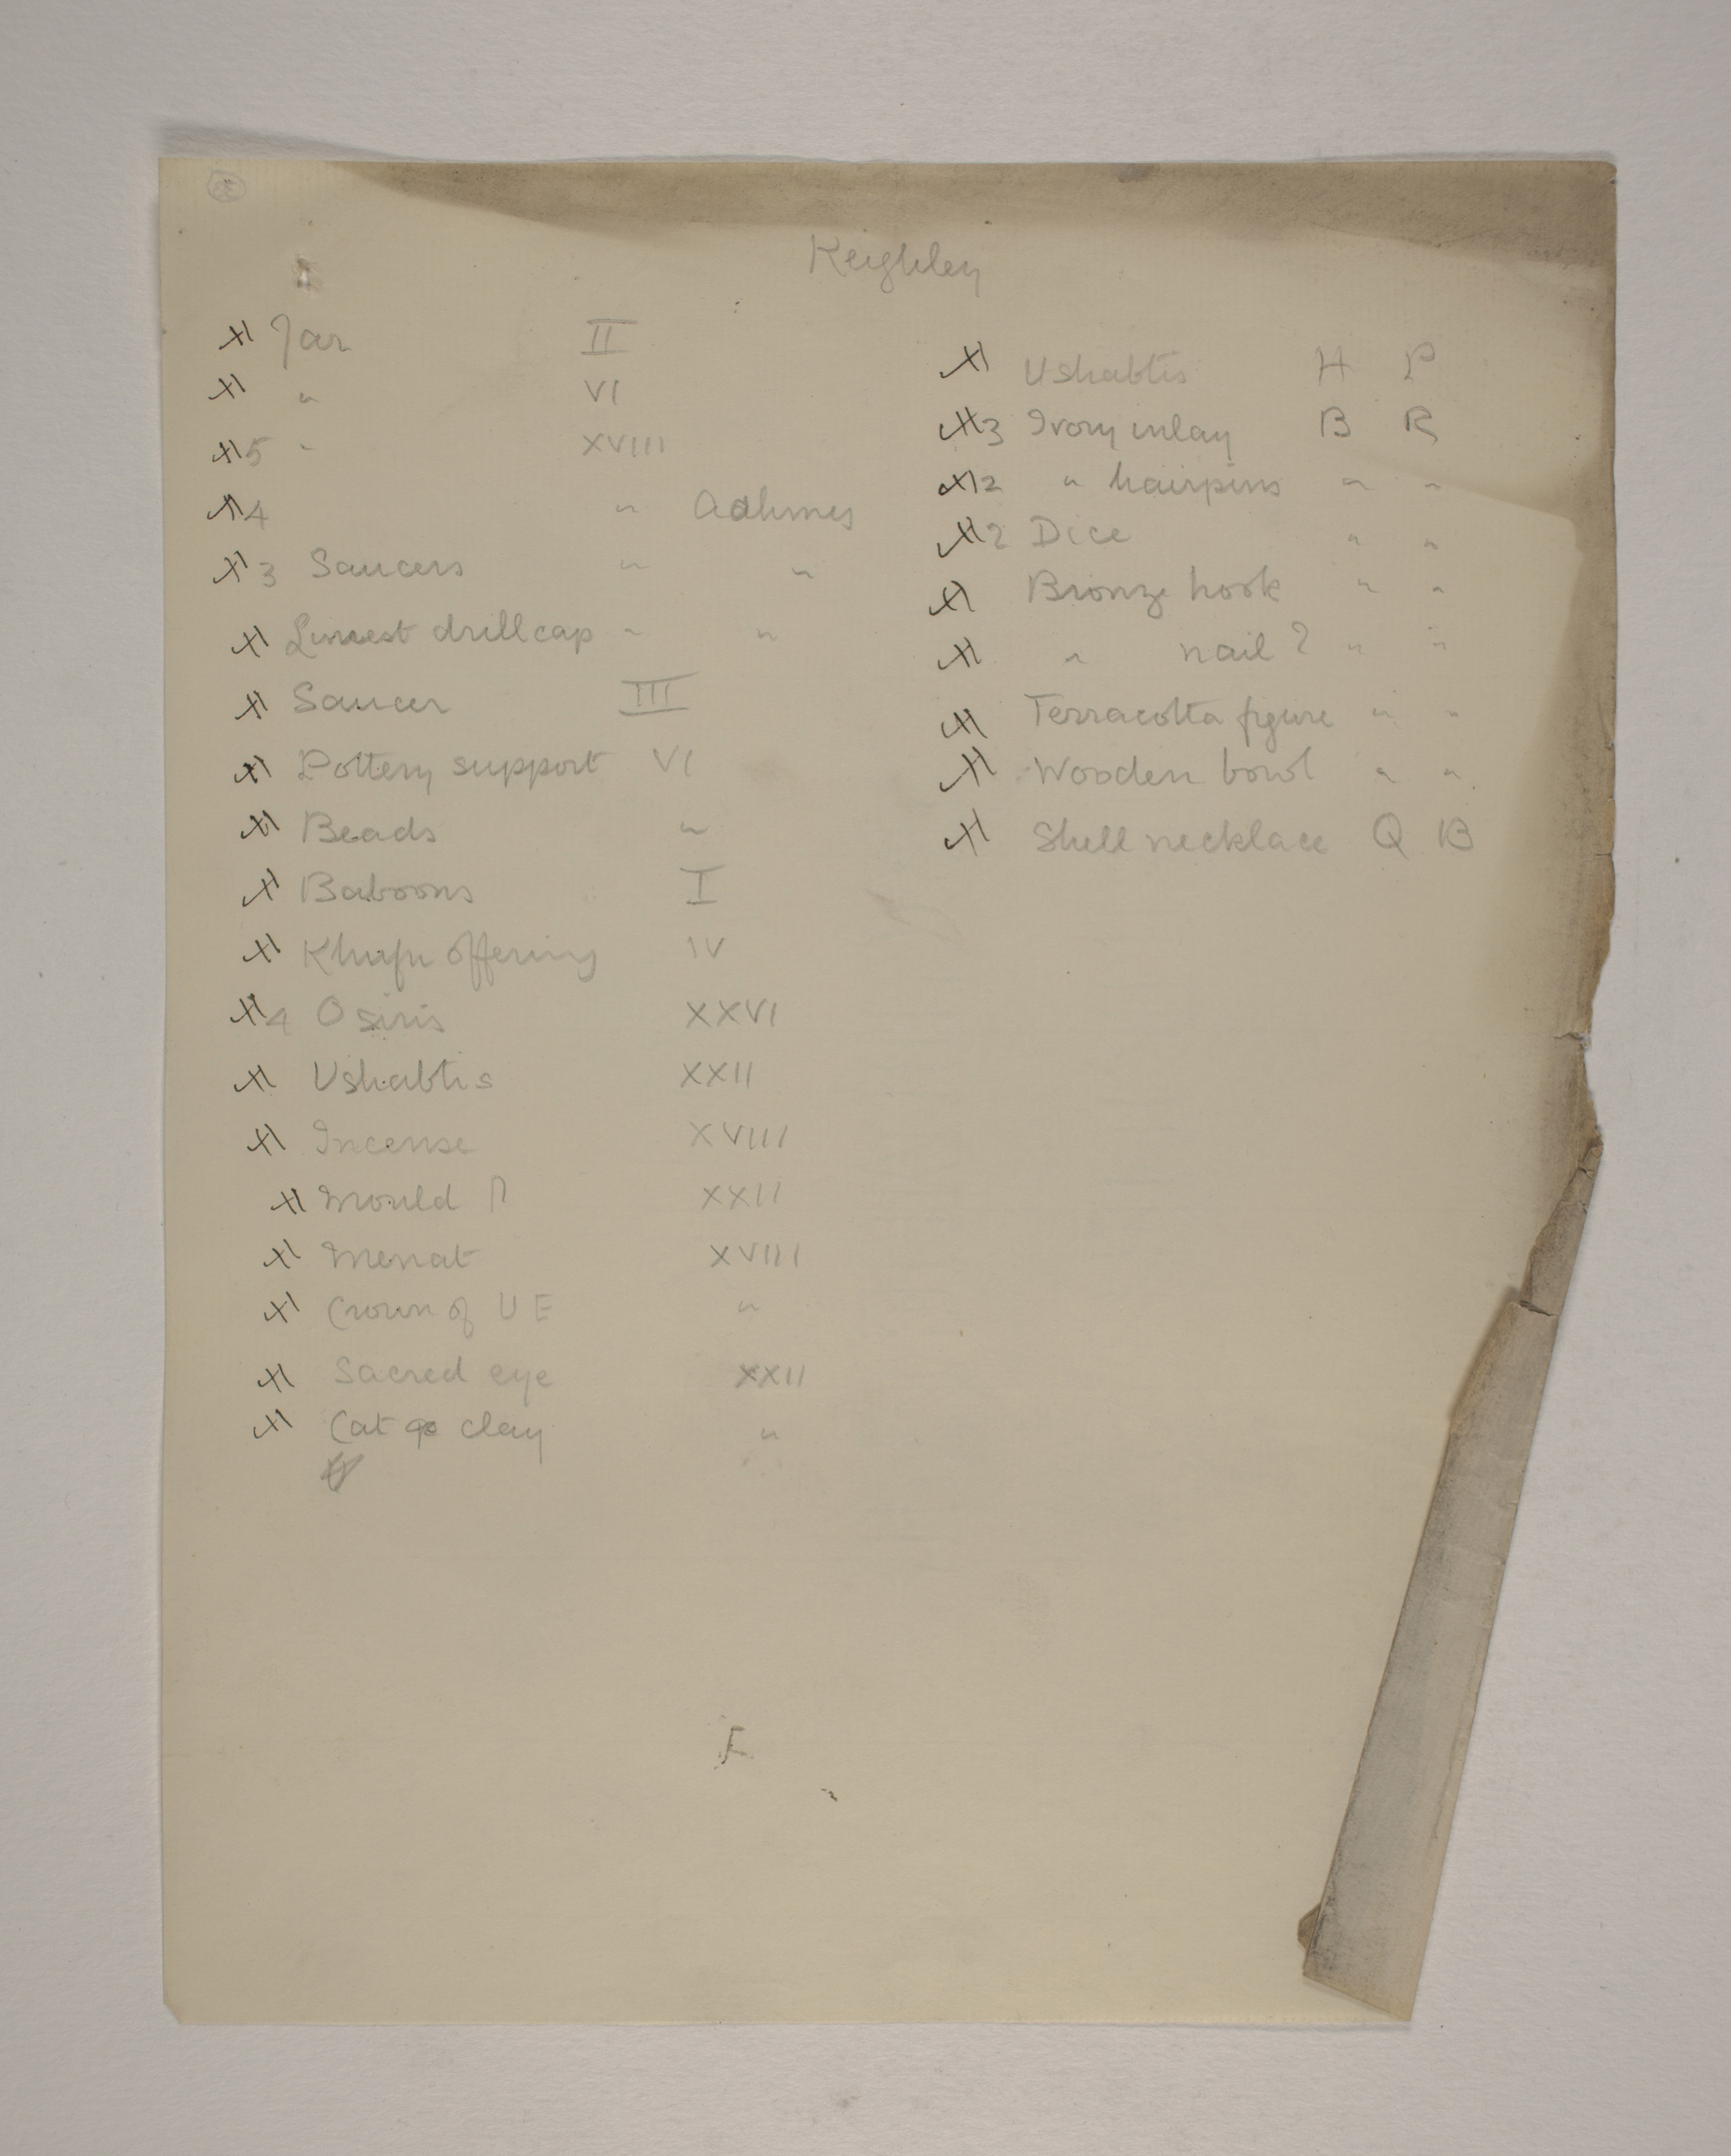 1902-03 Abydos Individual institution list  PMA/WFP1/D/11/33